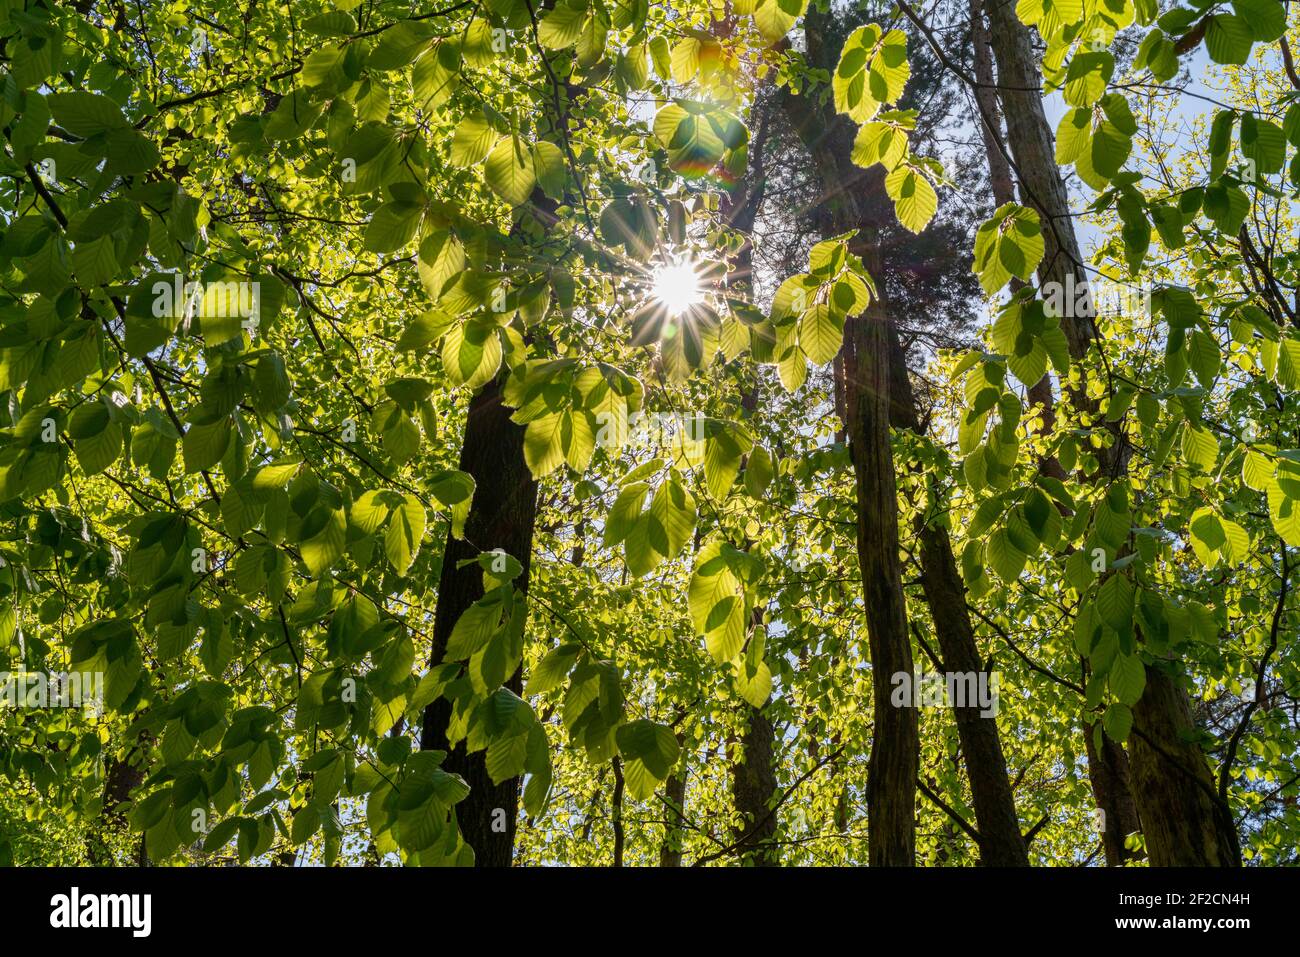 Close up pictures of lush green young leaves on a sunny day in the woods in spring, when nature wakes up to bloom with sunlight peaking through trees Stock Photo